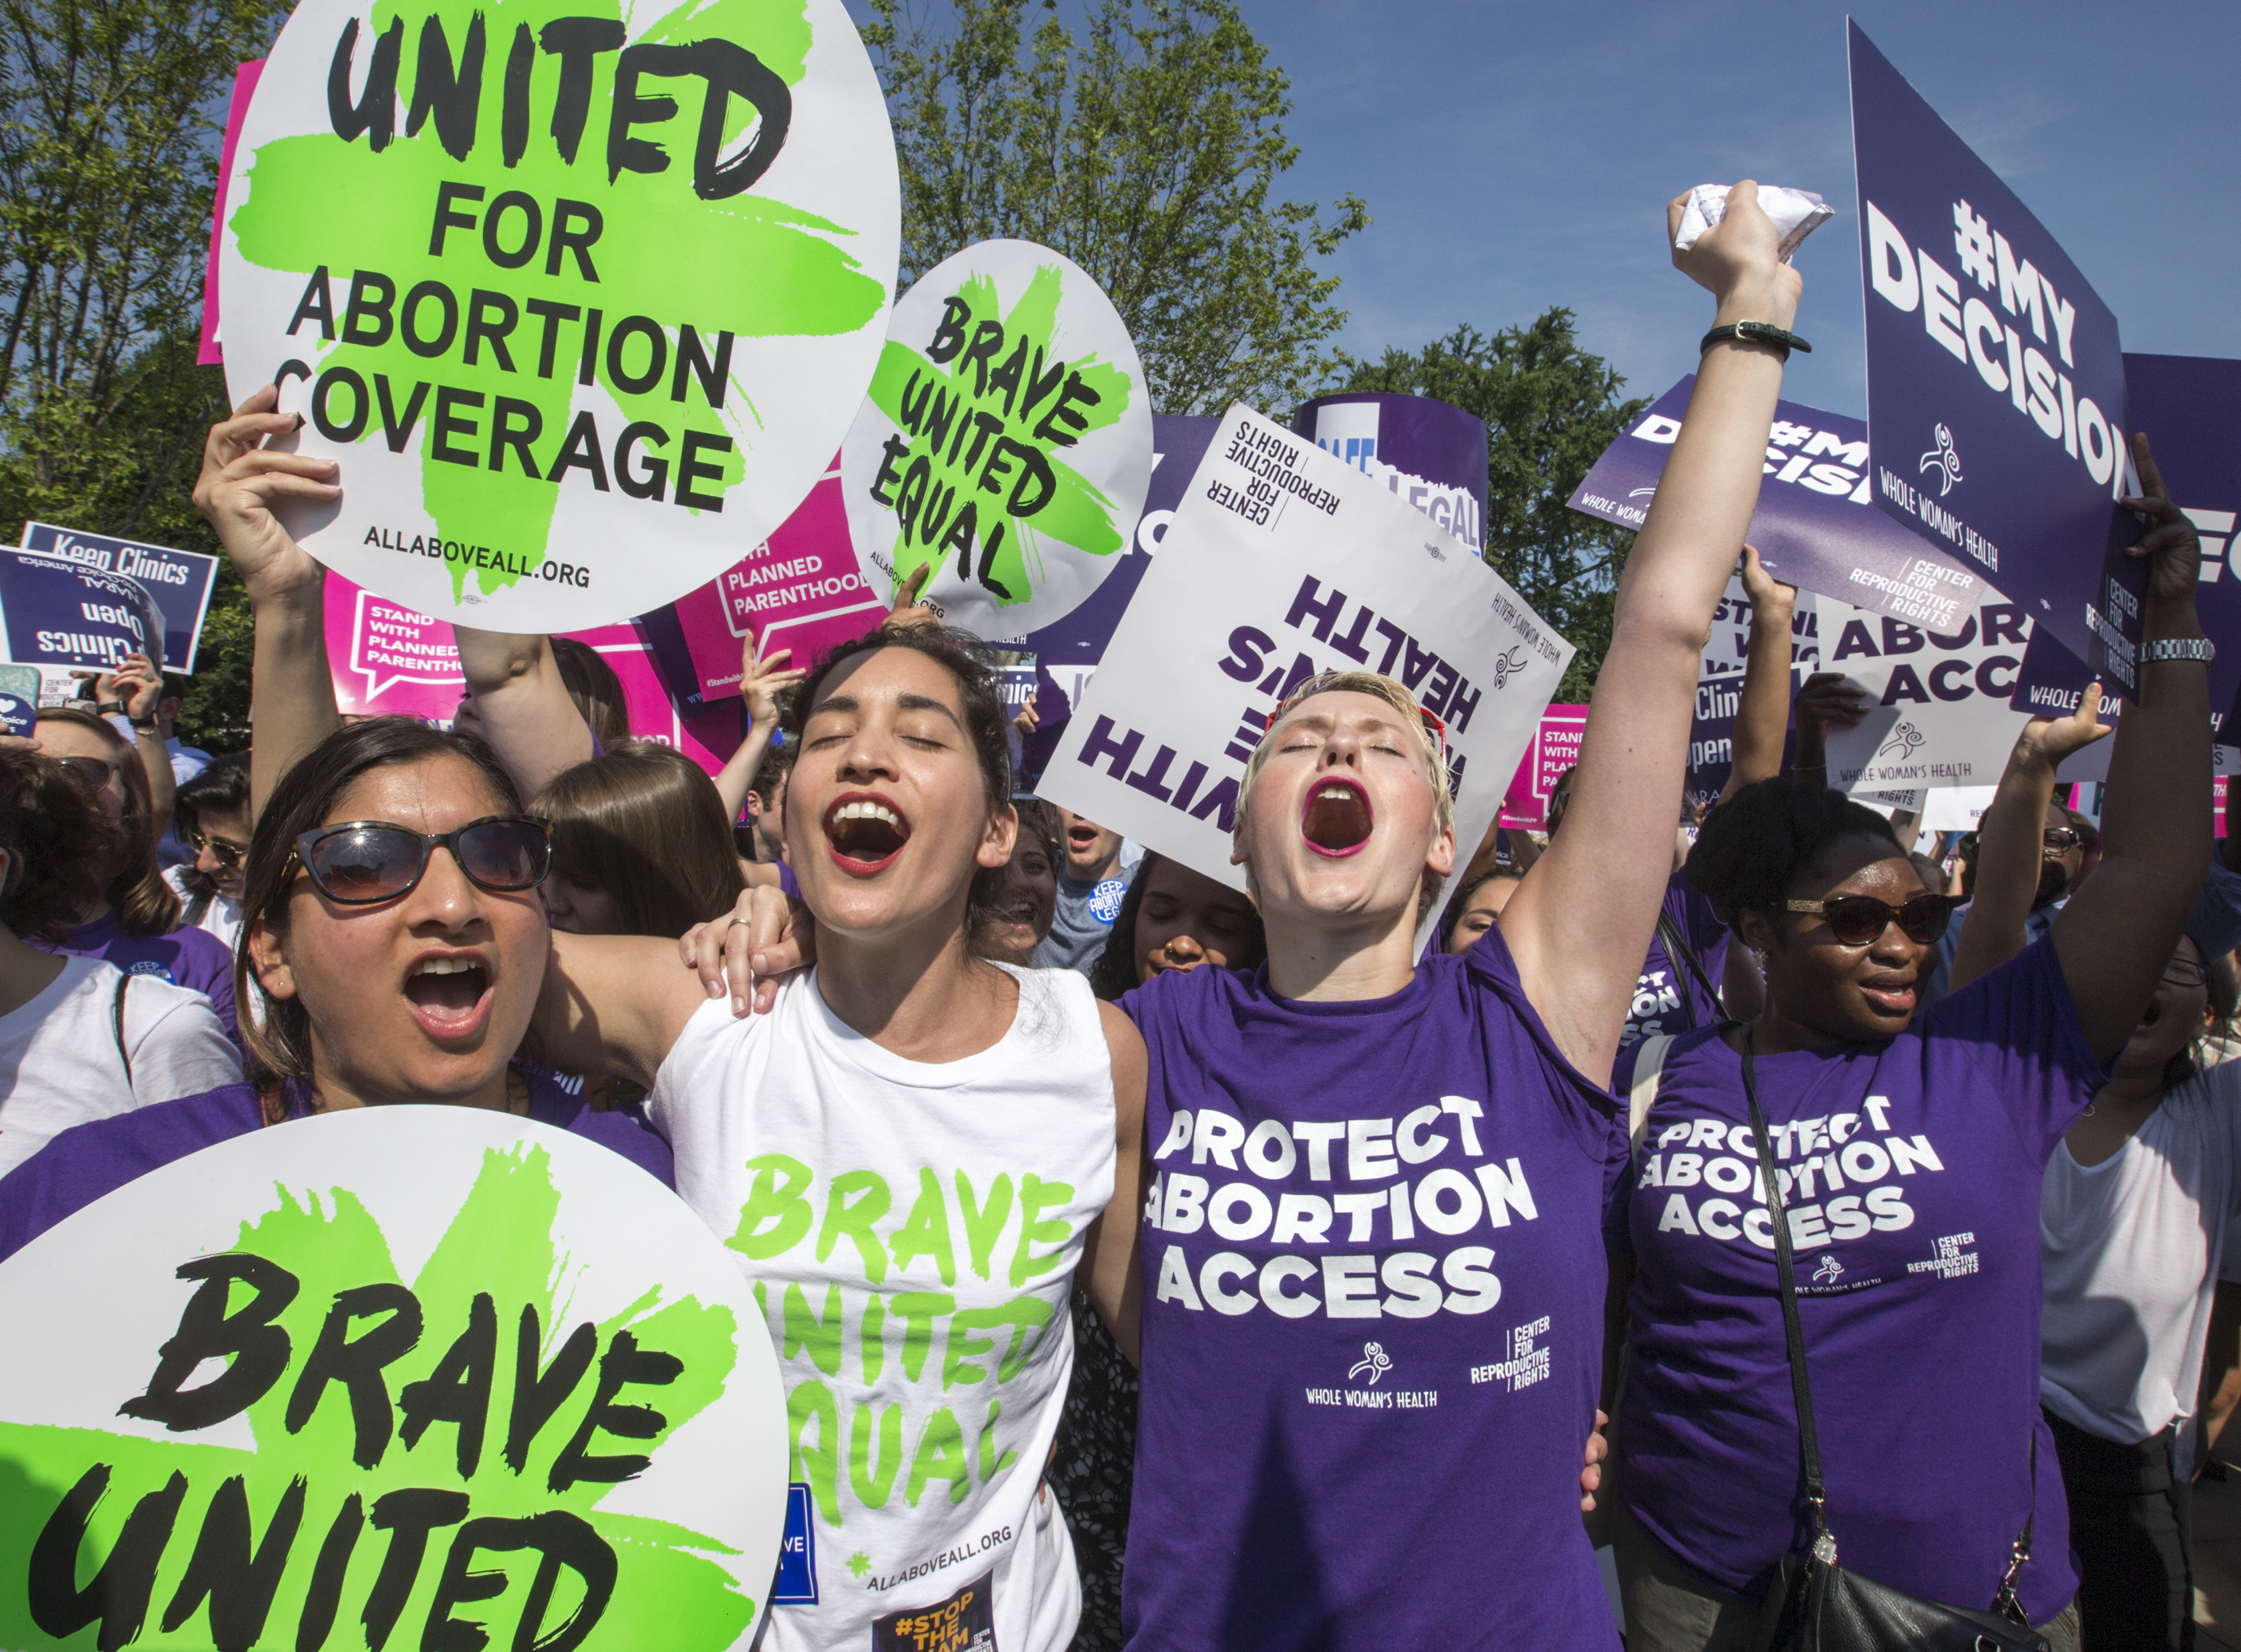 Abortion rights activists, from left, Ravina Daphtary of Philadelphia, Morgan Hopkins of Boston, and Alison Turkos of New York City, rejoice in front of the Supreme Court in Washington, Monday, June 27, 2016, as the justices struck down the strict Texas anti-abortion restriction law known as HB2. (AP) 